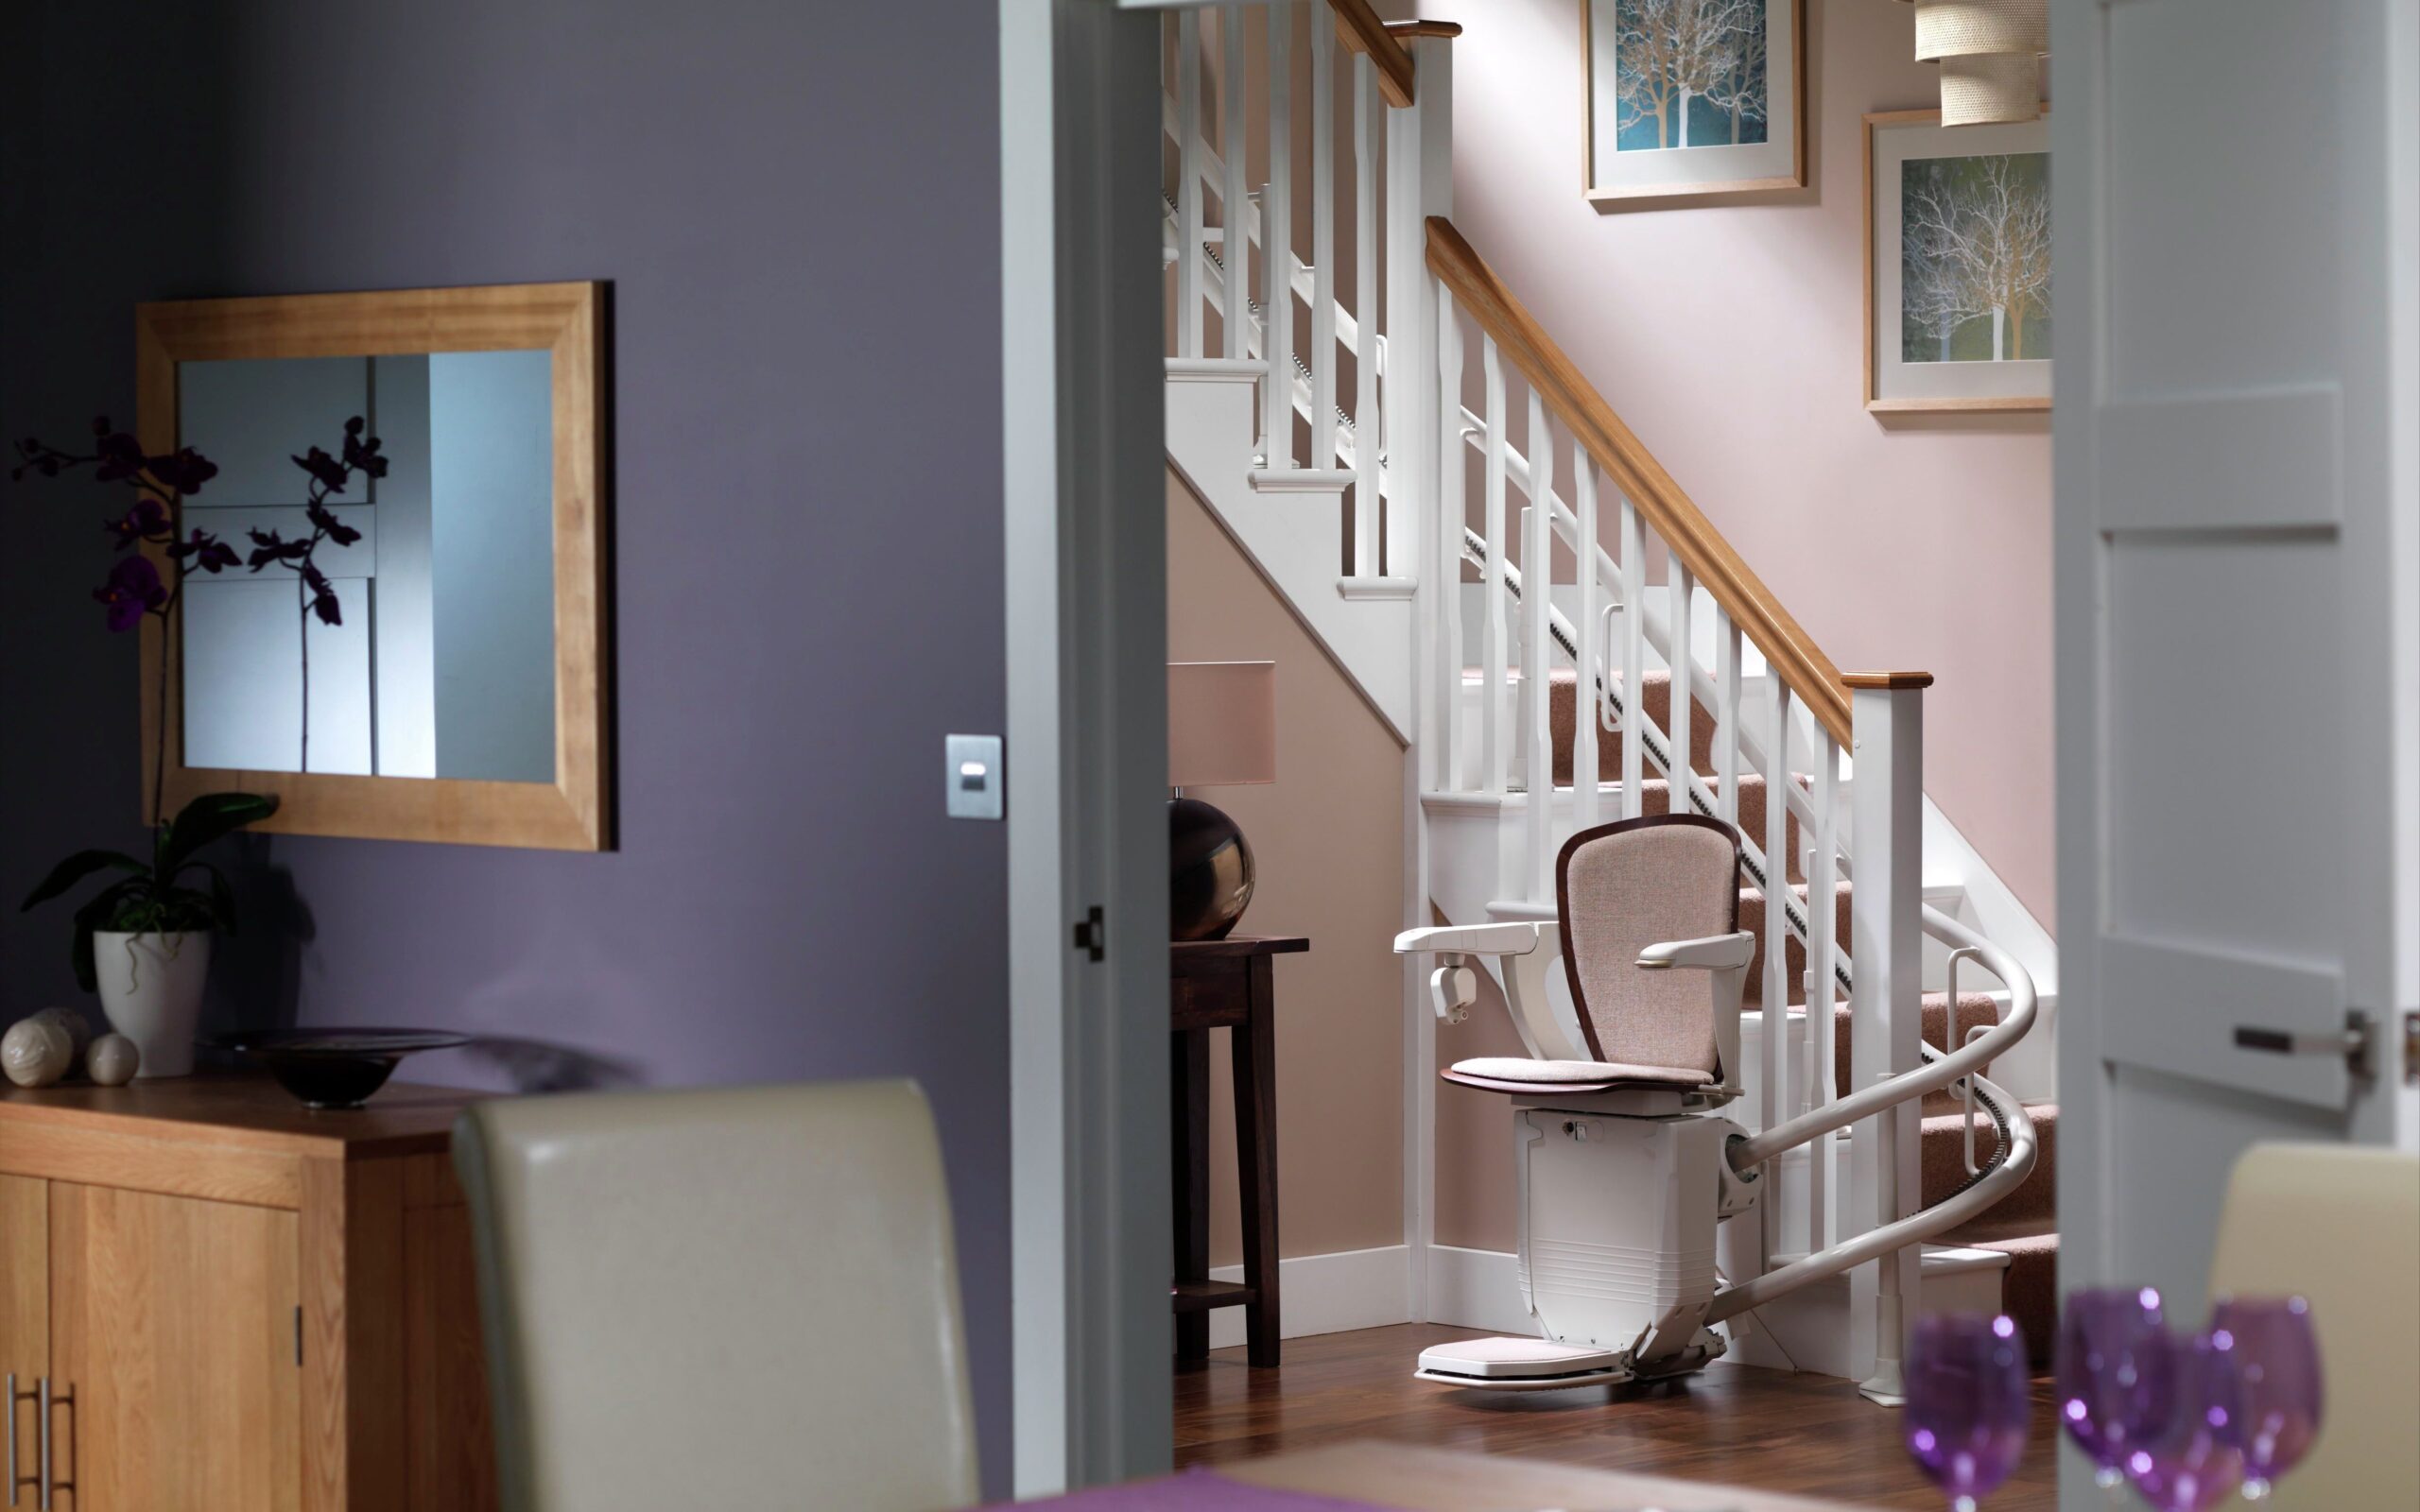 Image of curved stair lift parked at the base of staircase. Seen through an open doorway. 